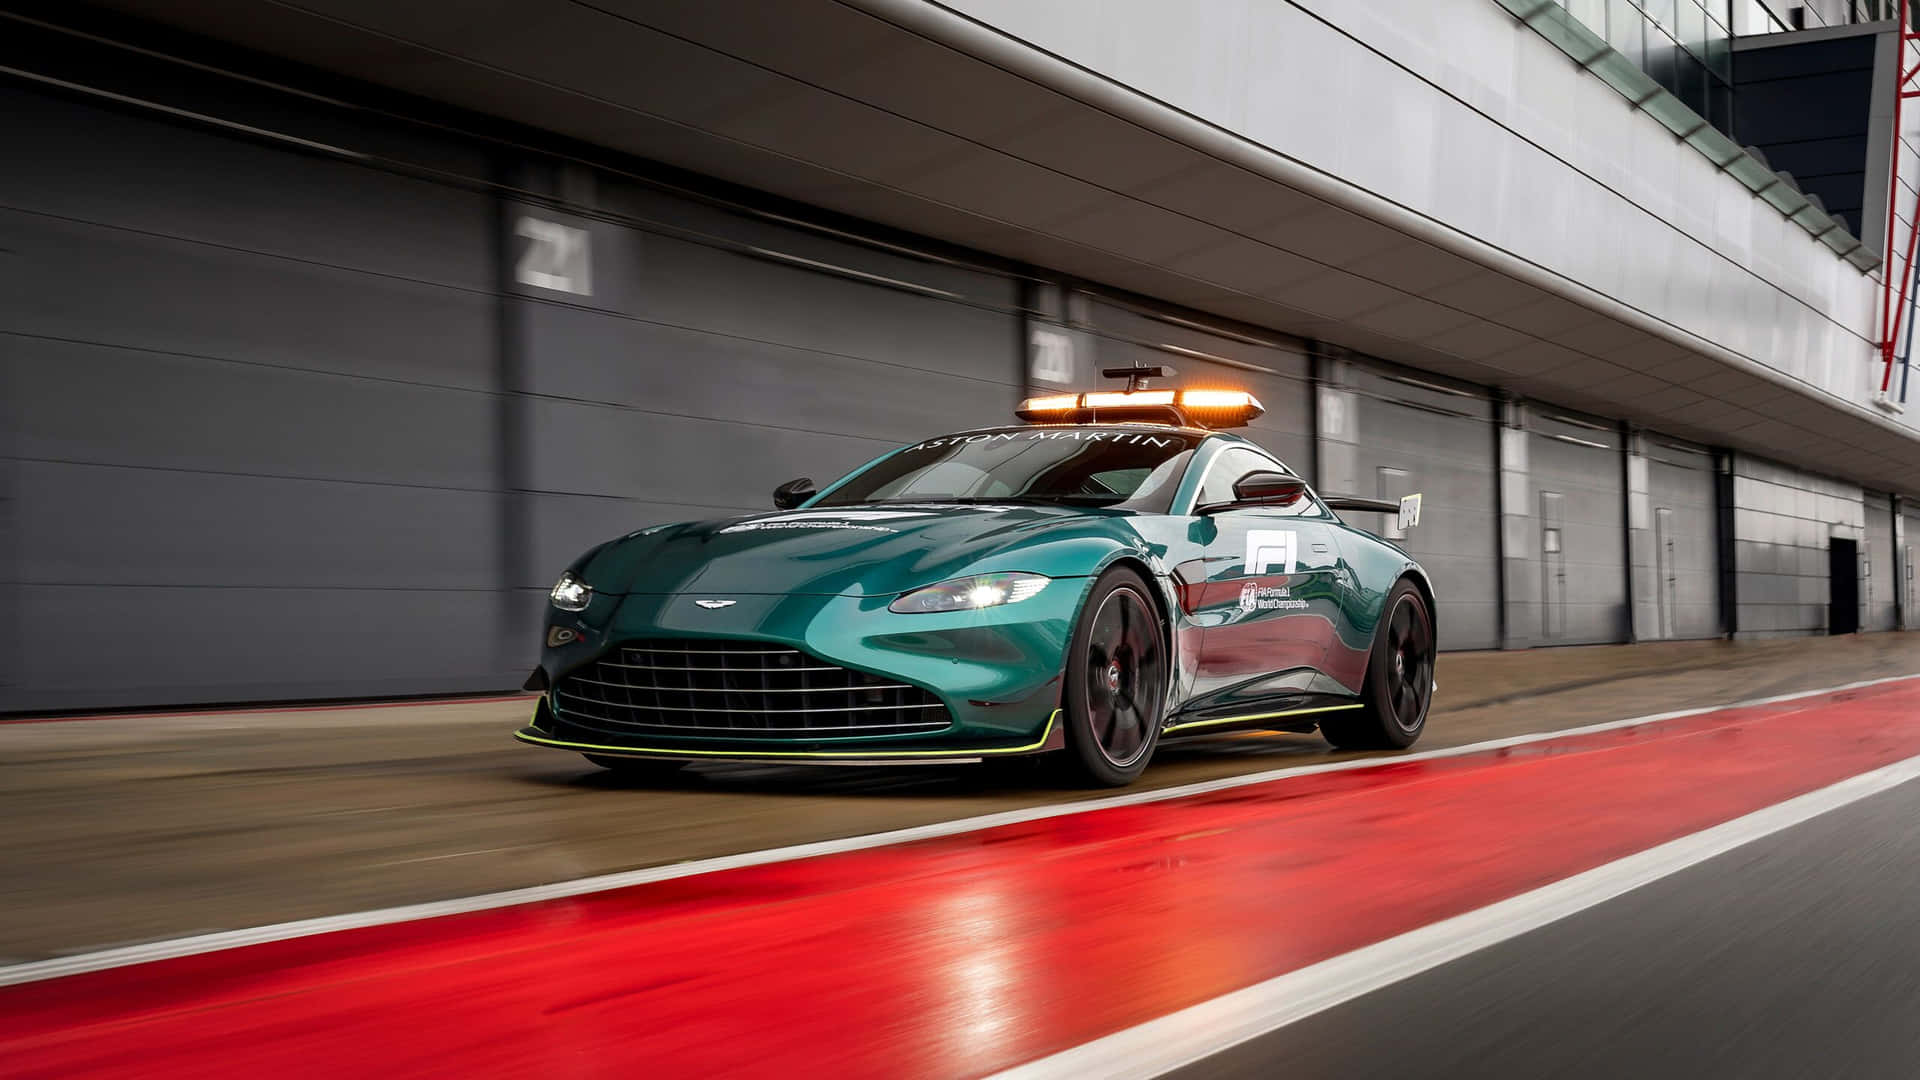 Experience the Power and Class of an Aston Martin